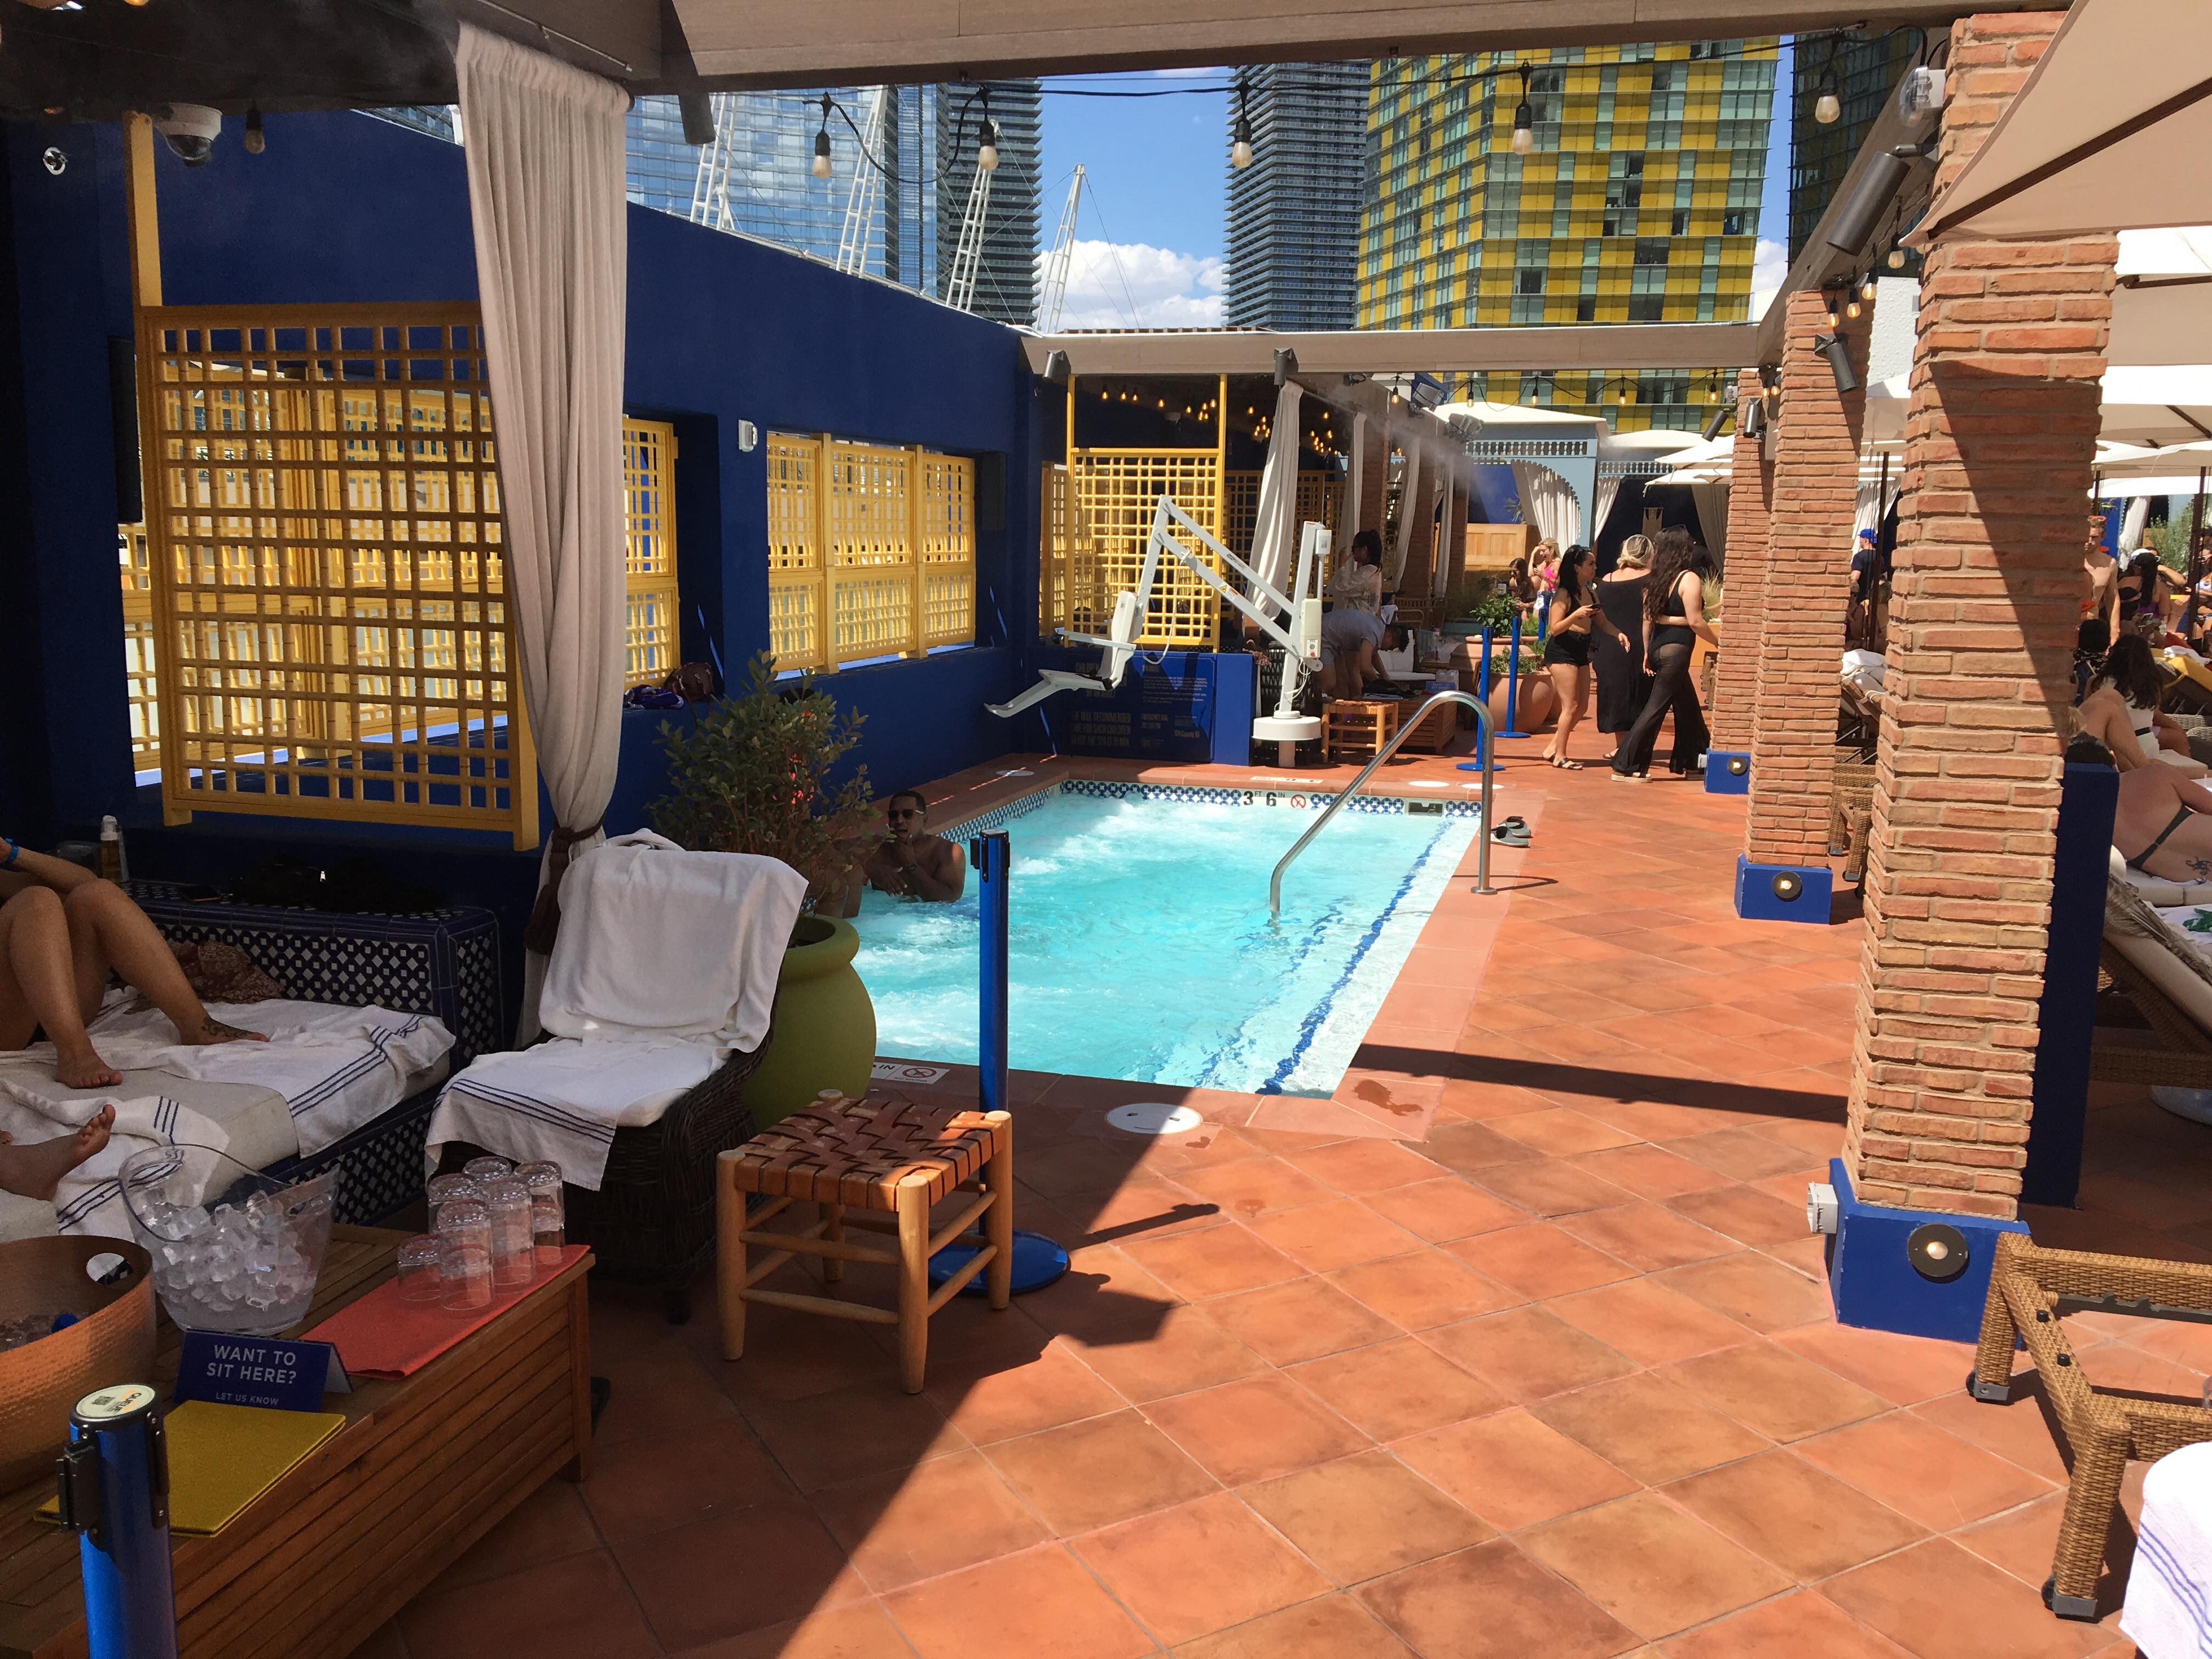 NoMad launches a pool party in April - Eater Vegas